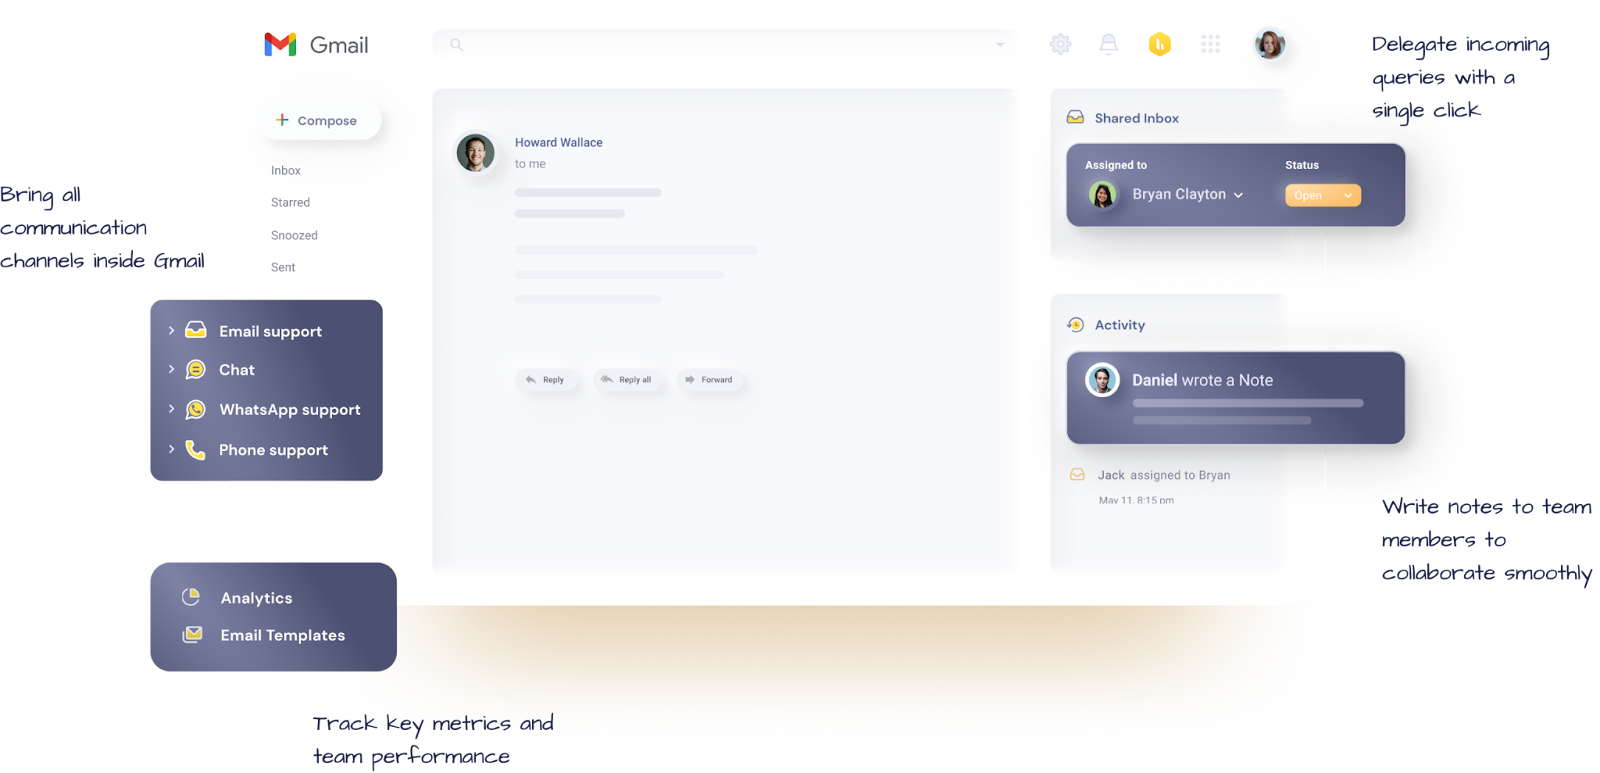 Interface showcasing Hiver - customer support platform, positioned as one of the Freshdesk alternatives. It integrates multiple communication channels within Gmail, including email, chat, WhatsApp, and phone support. The design highlights features like a shared inbox, one-click query delegation, activity logs, performance analytics, and customizable email templates. It facilitates teamwork with features for writing and sharing notes directly among team members for efficient collaboration.